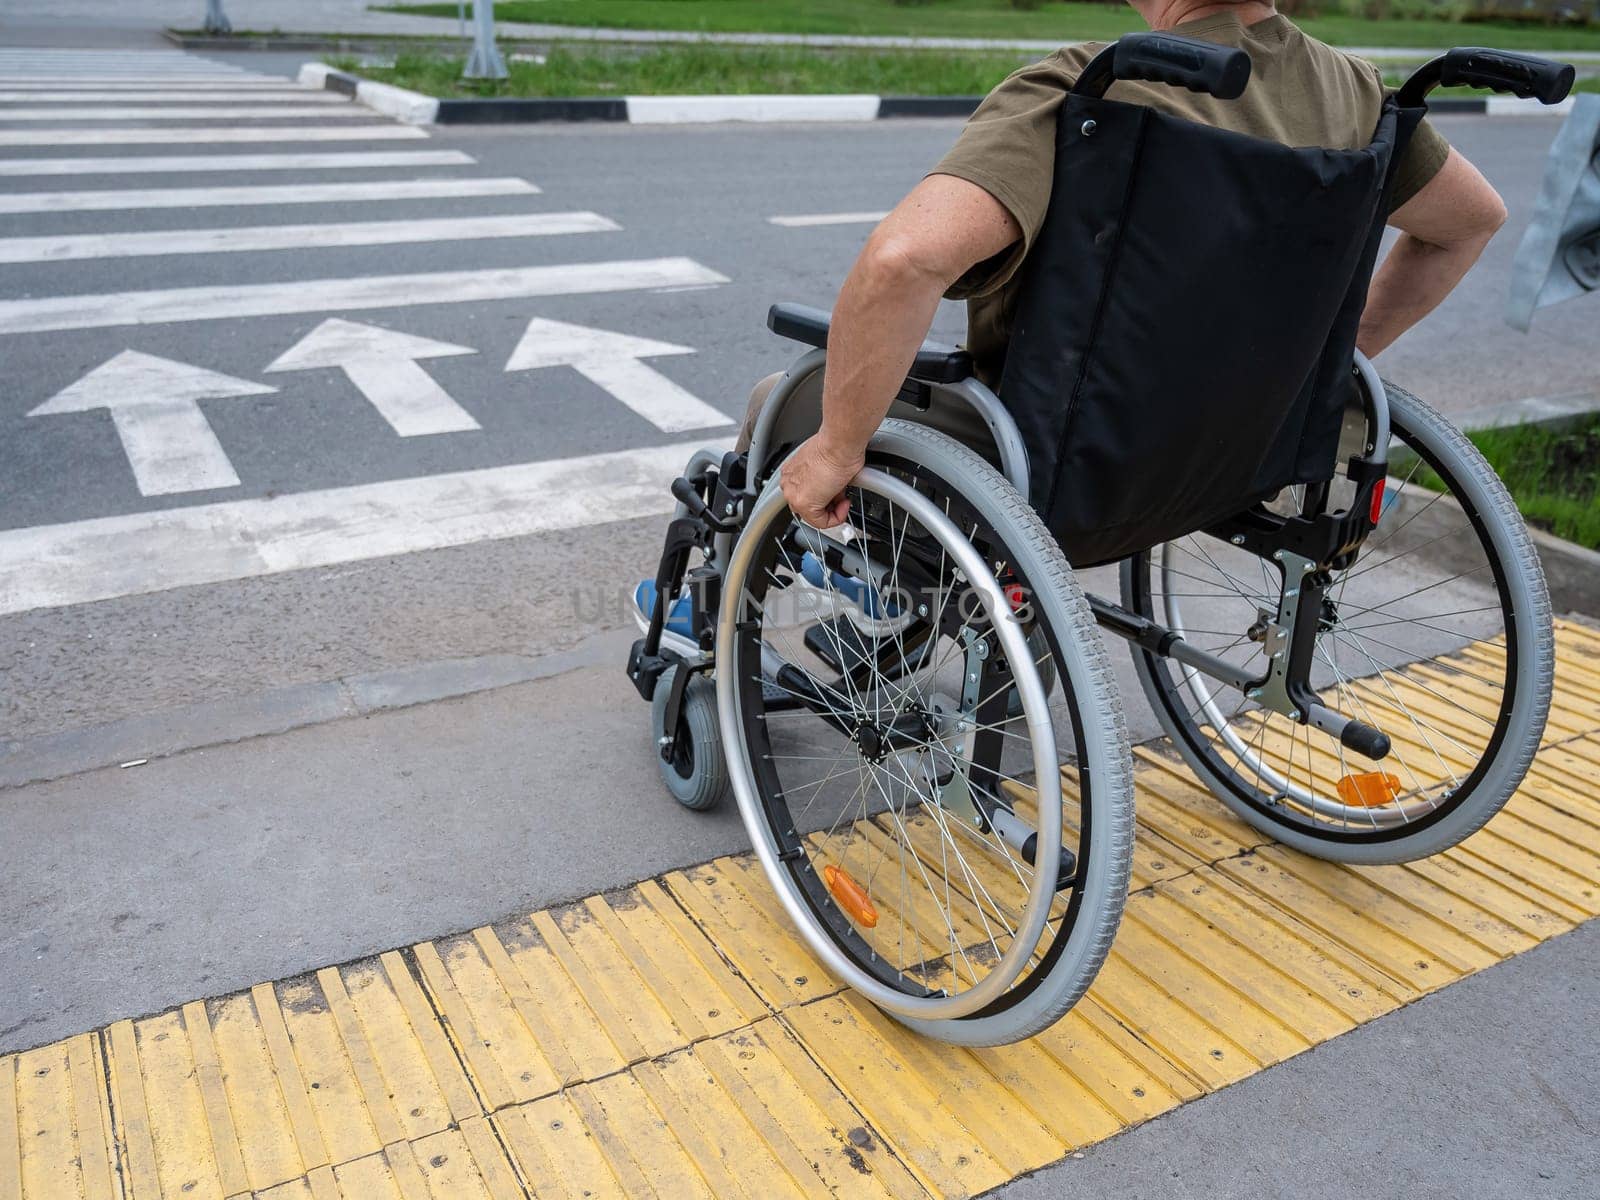 Rear view of an elderly woman in a wheelchair going to a pedestrian crossing. Close-up on wheels. by mrwed54